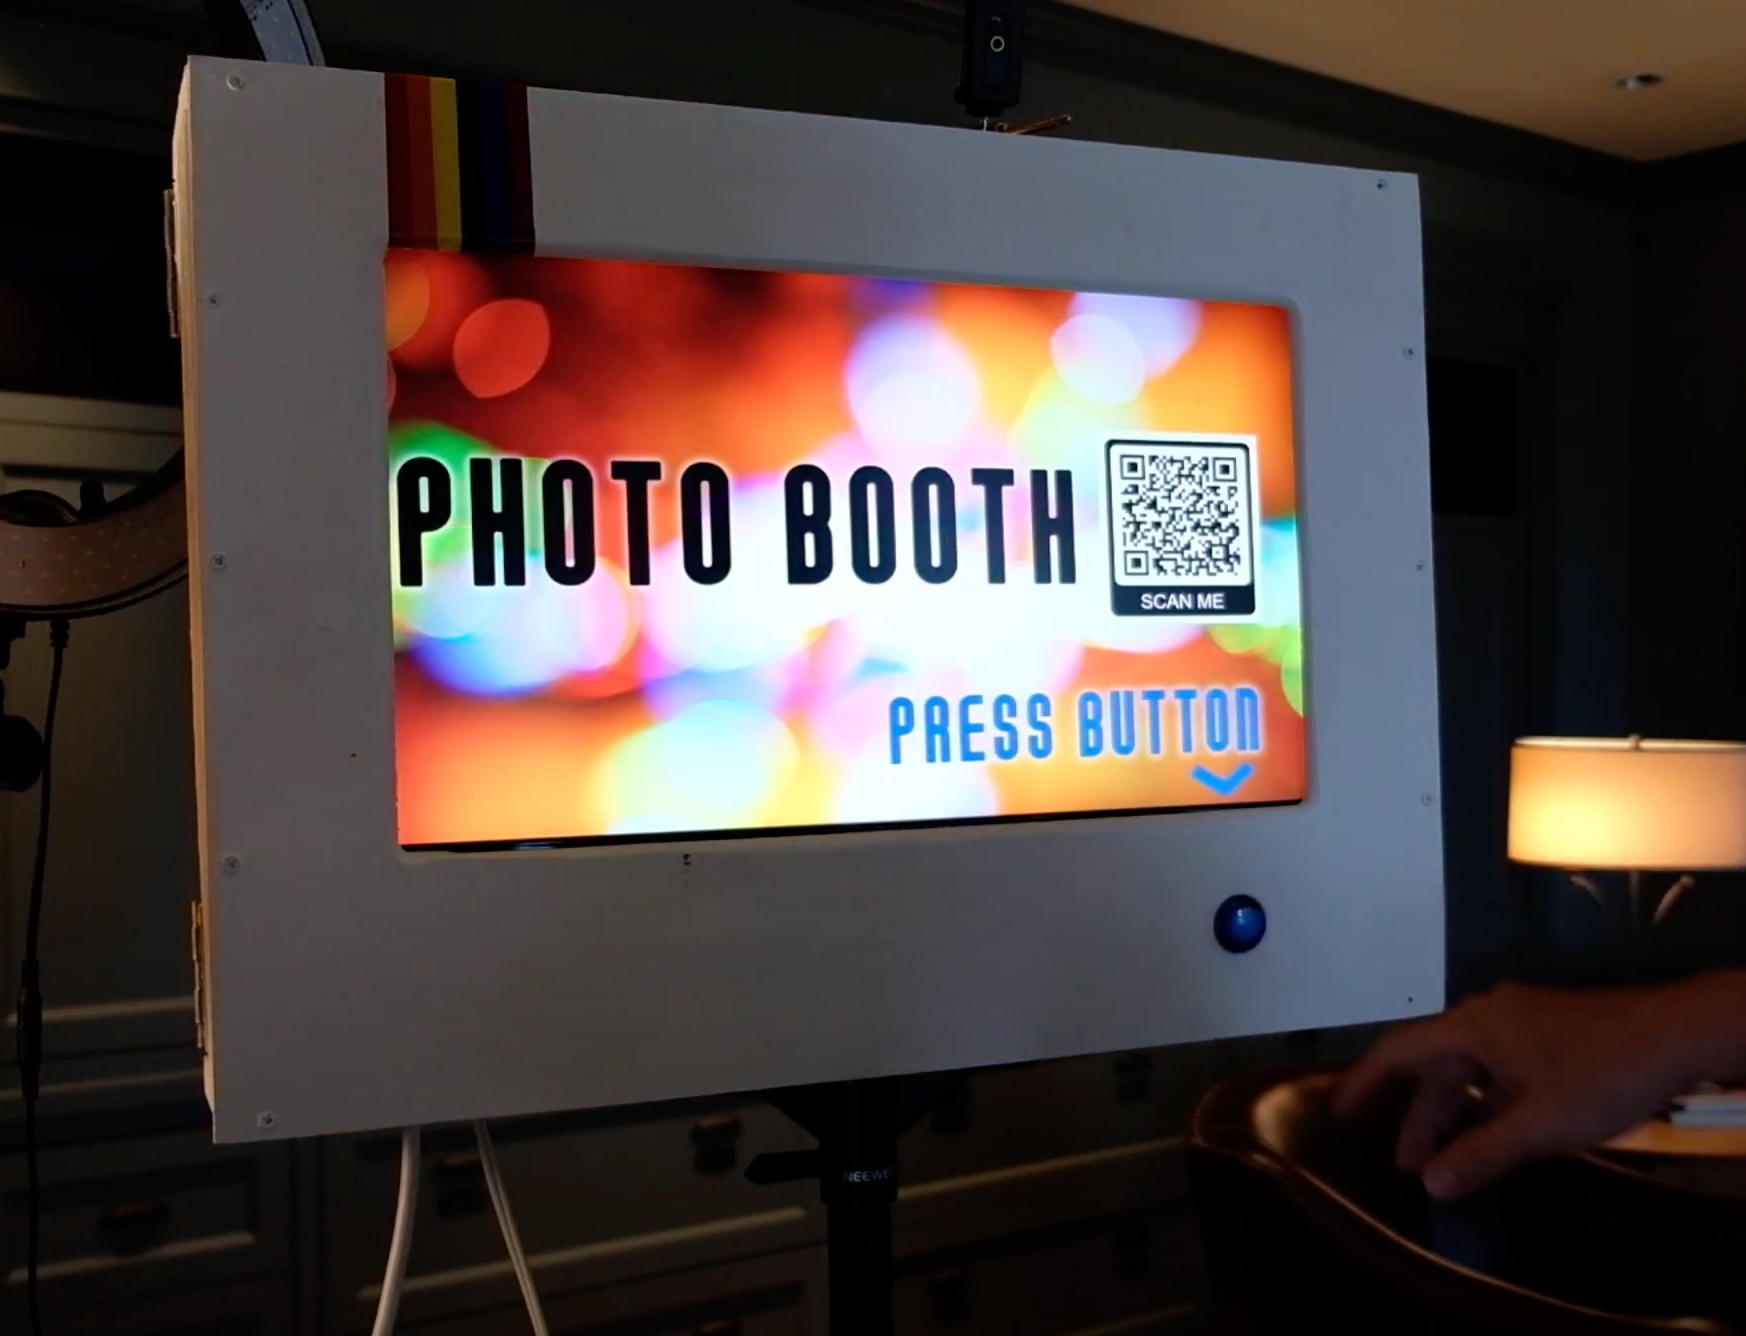 DIY Photo Booth 2.0: Now Controls an iPhone or iPad